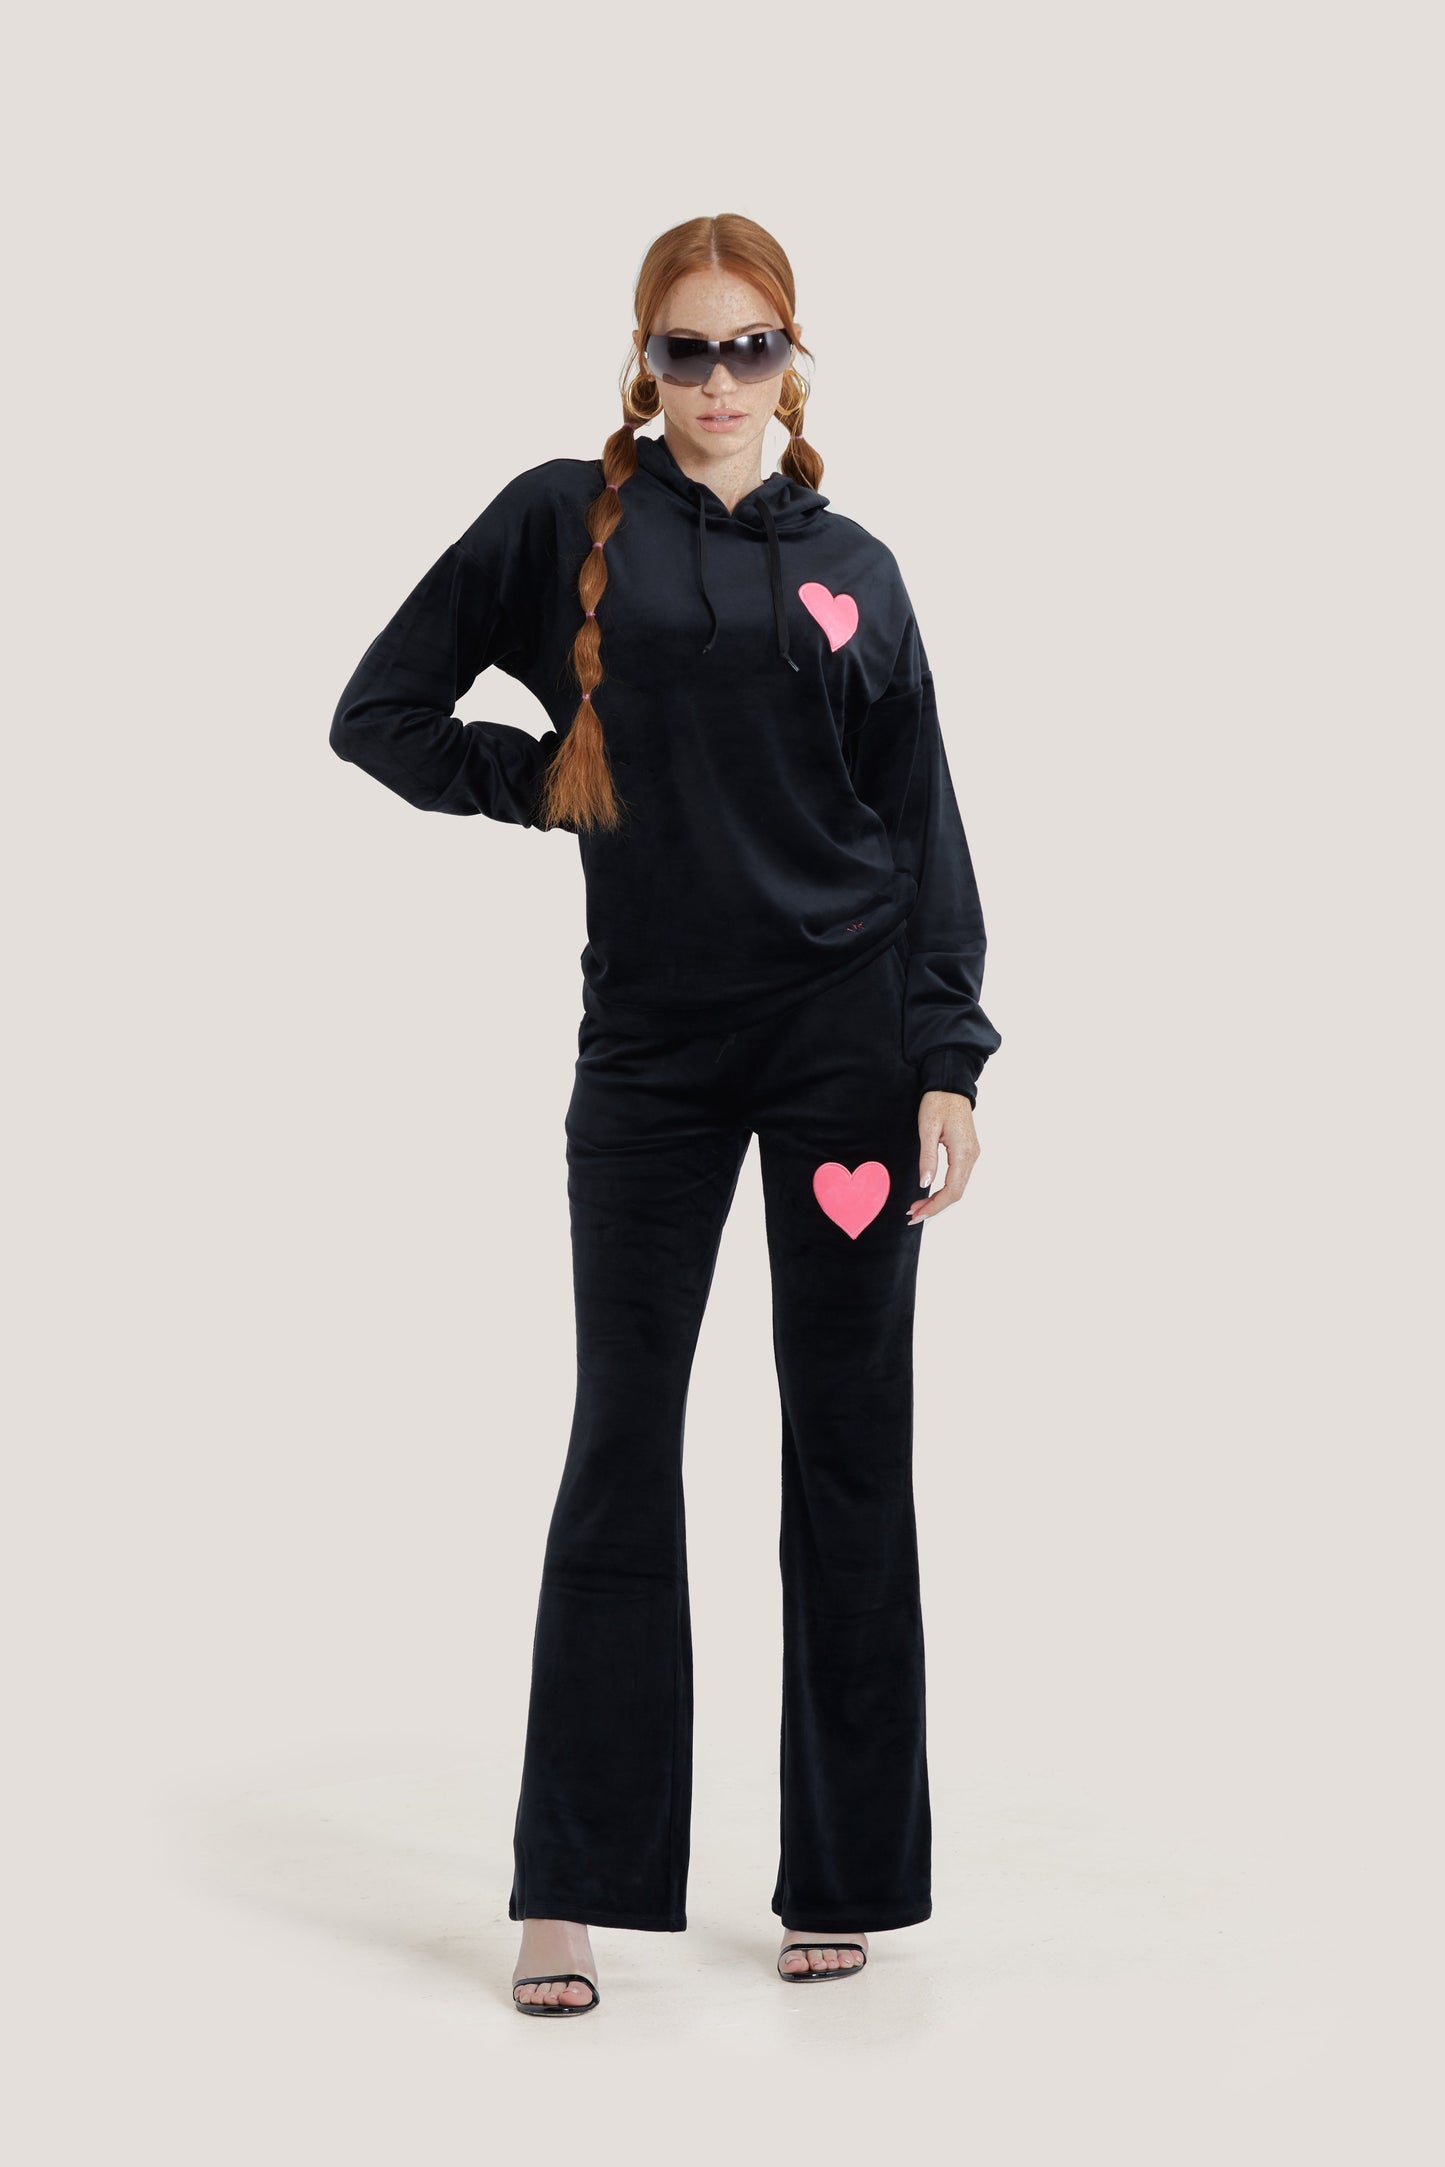 In Love With You Pant by Paris Hilton Tracksuits